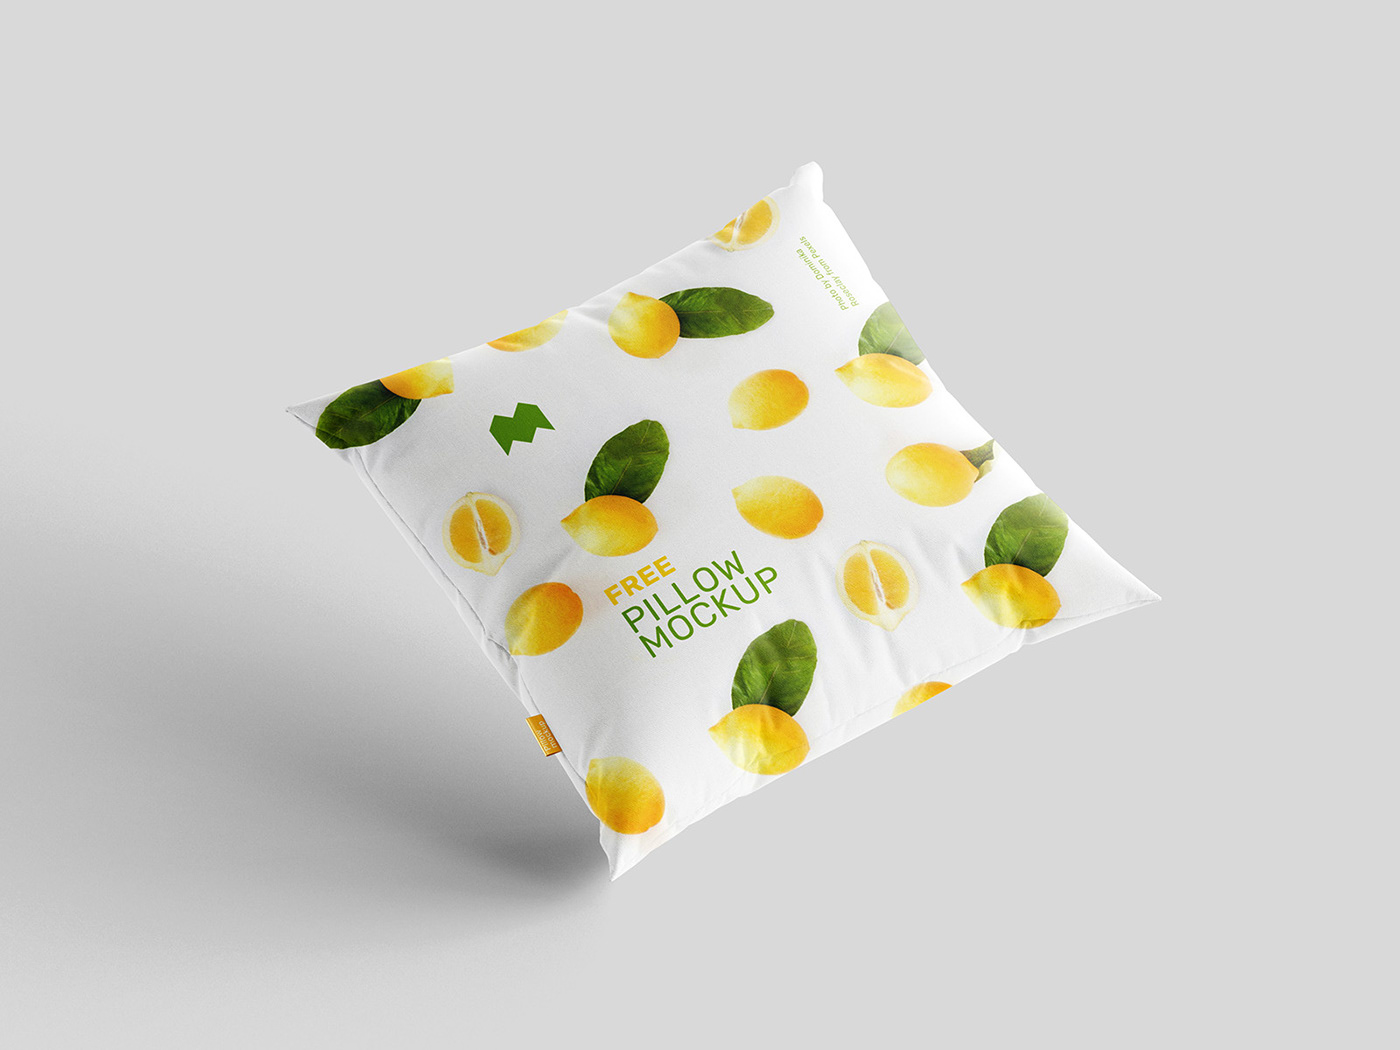 cushion download fabric free Mockup pillow psd template